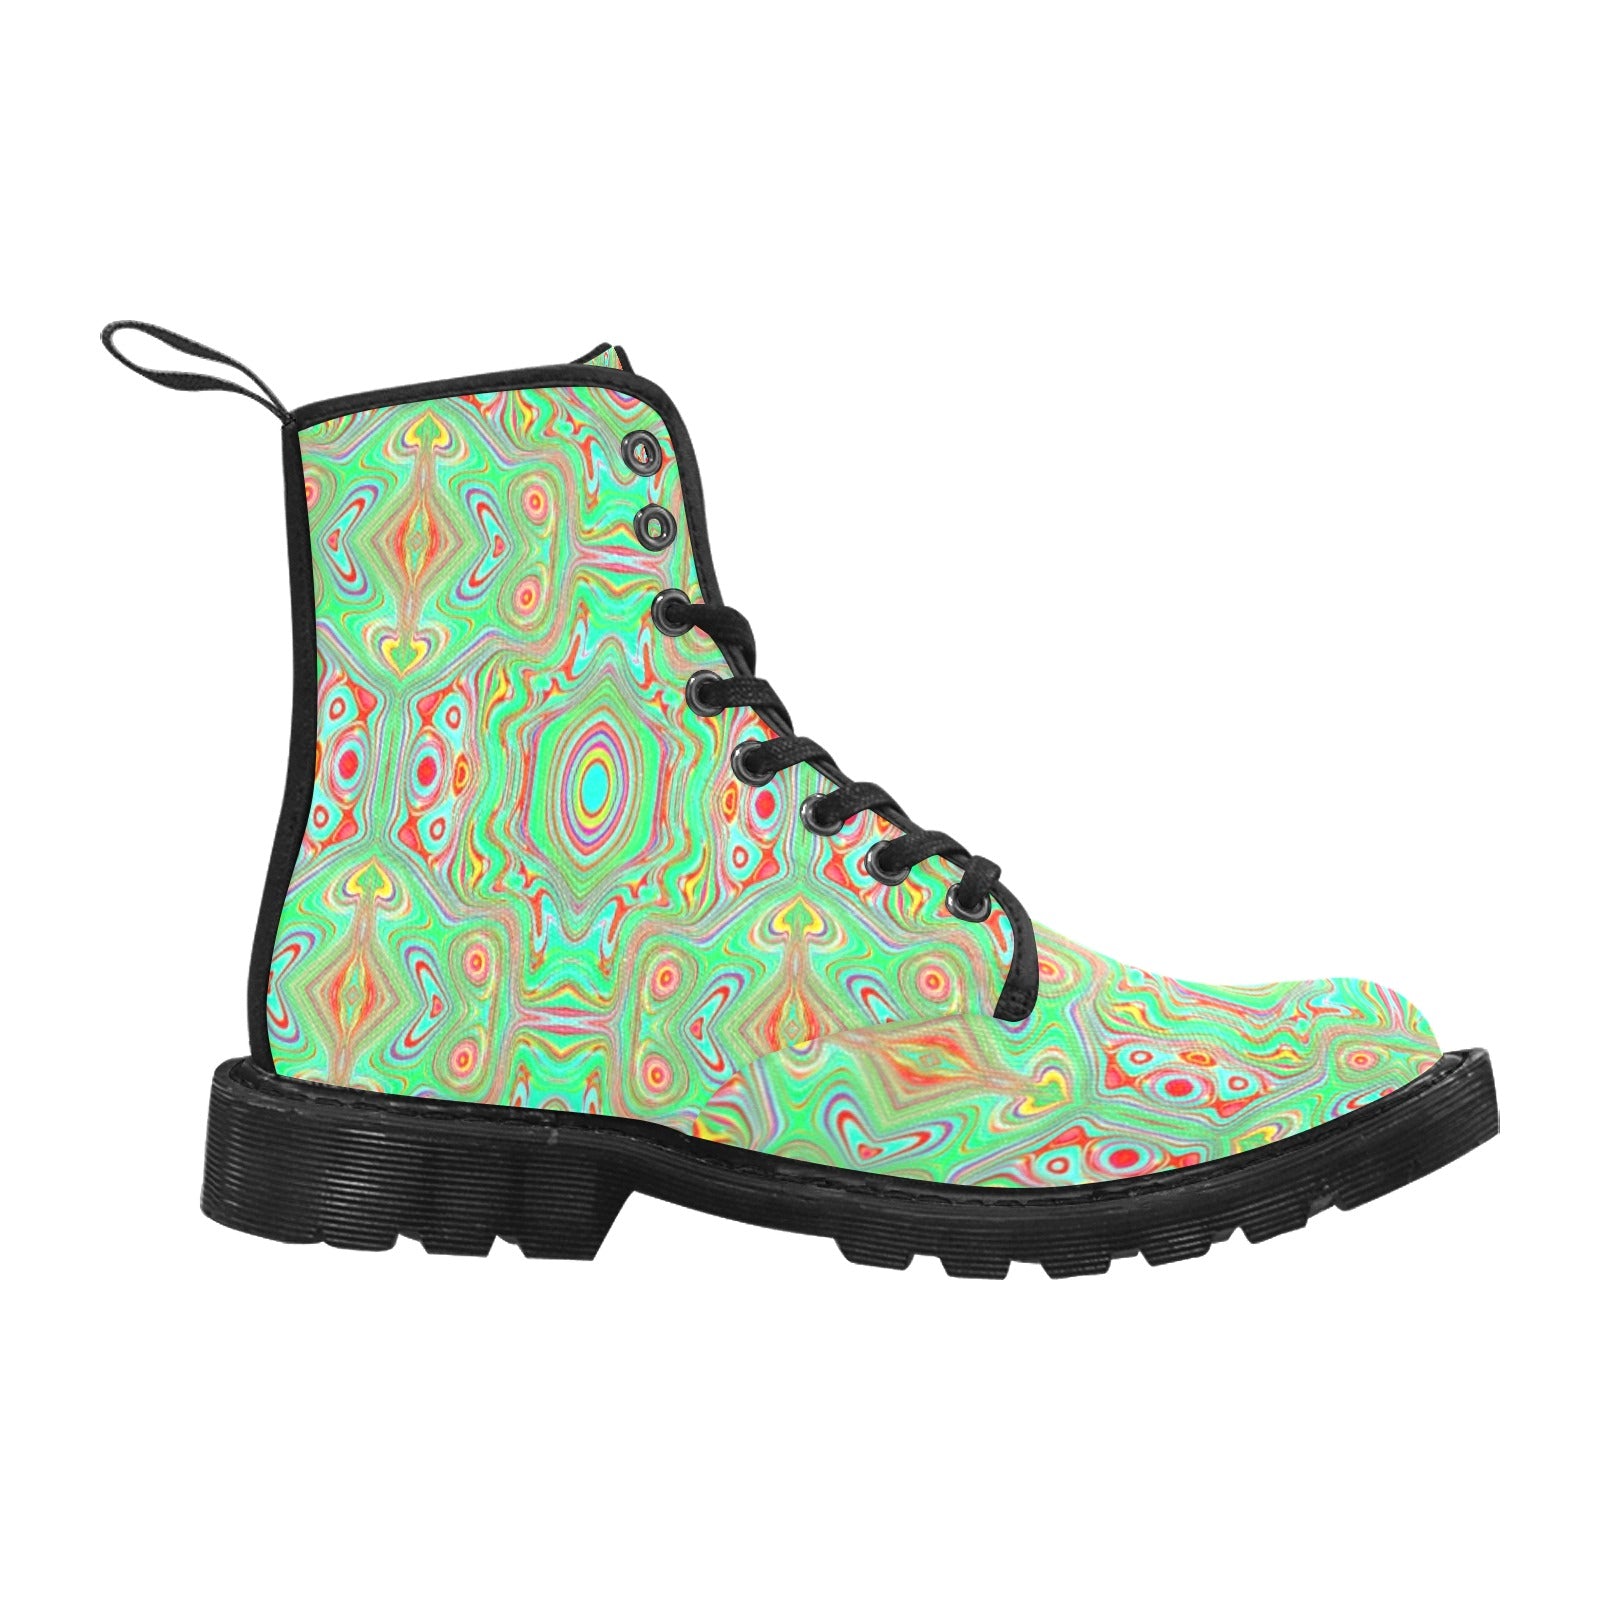 Boots for Women, Trippy Retro Orange and Lime Green Abstract Pattern - Black